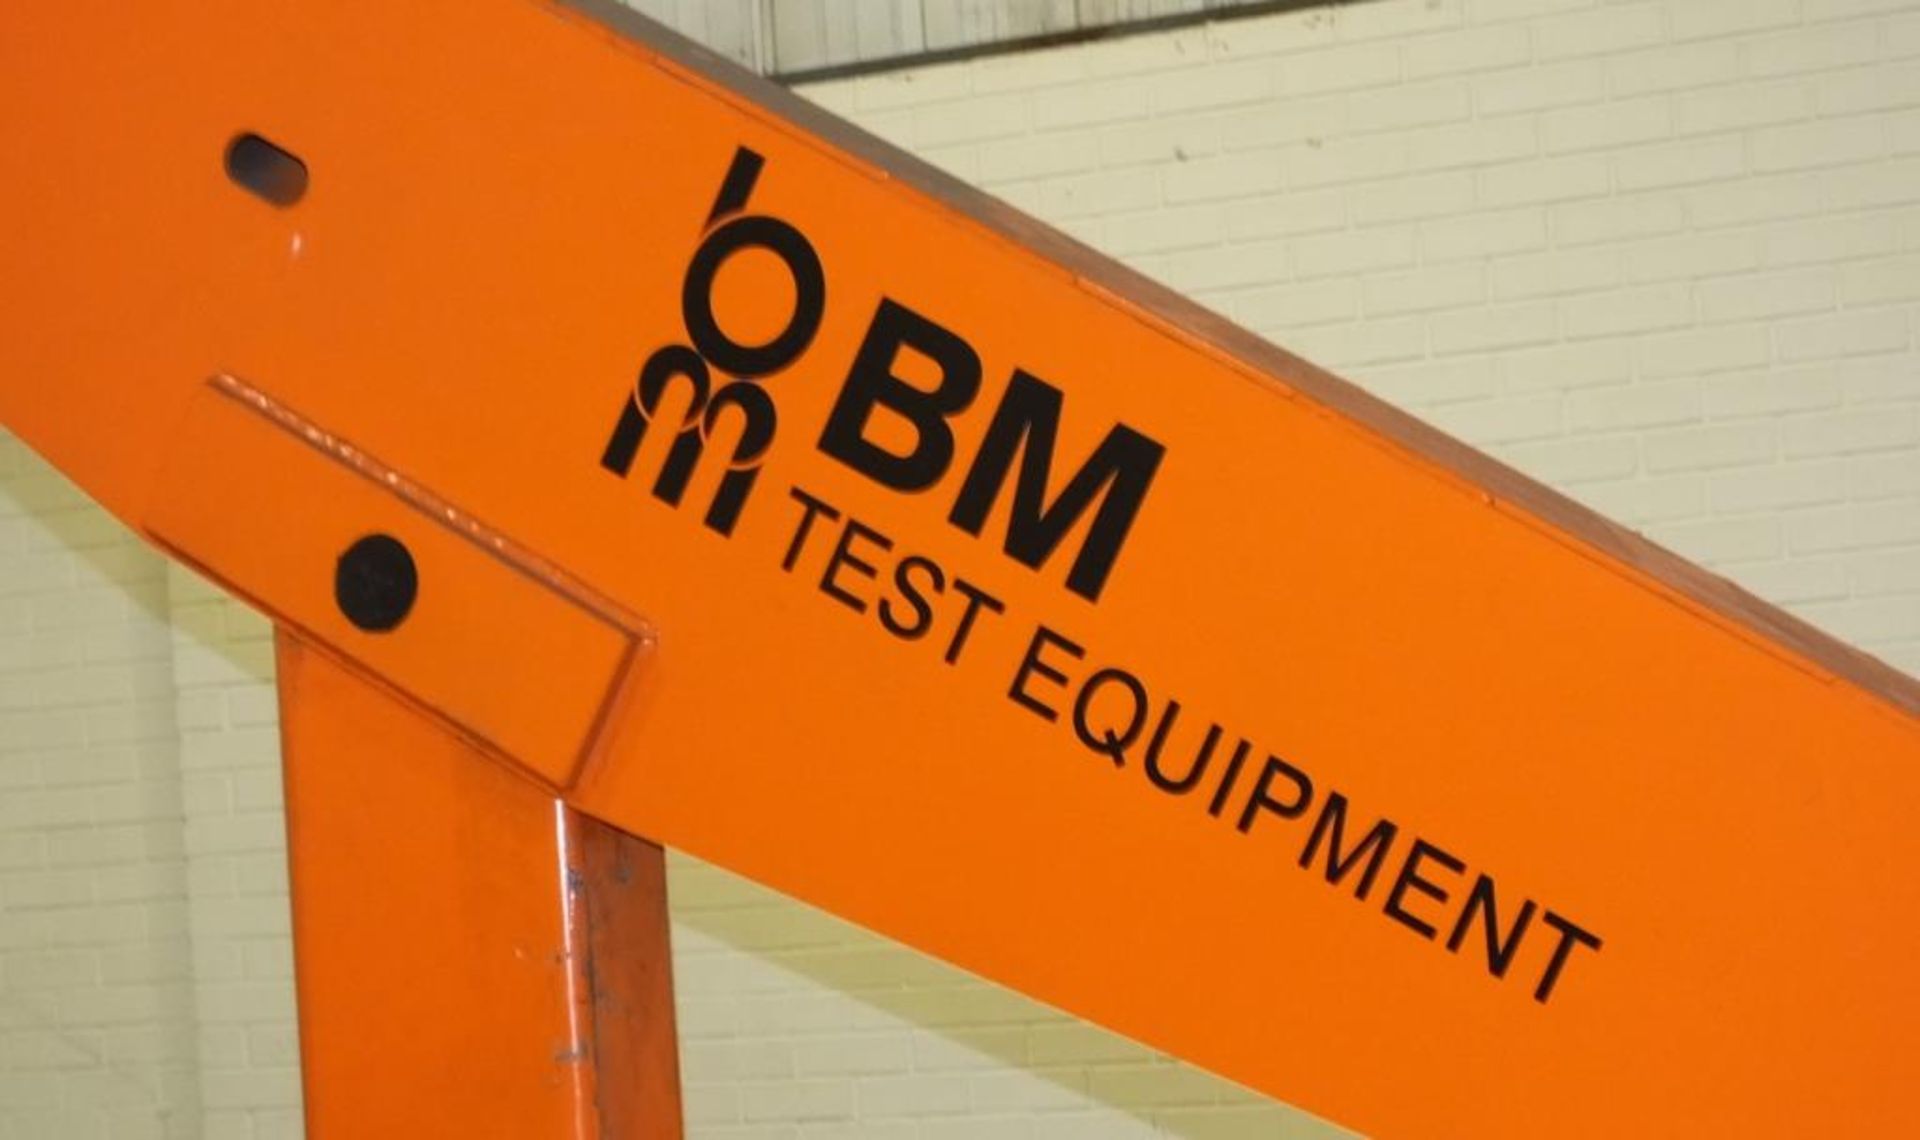 BM Test Equipment Lorry Bed Load Simulator Tester - £5+ Vat Loading Charge Applied to this - Image 2 of 7